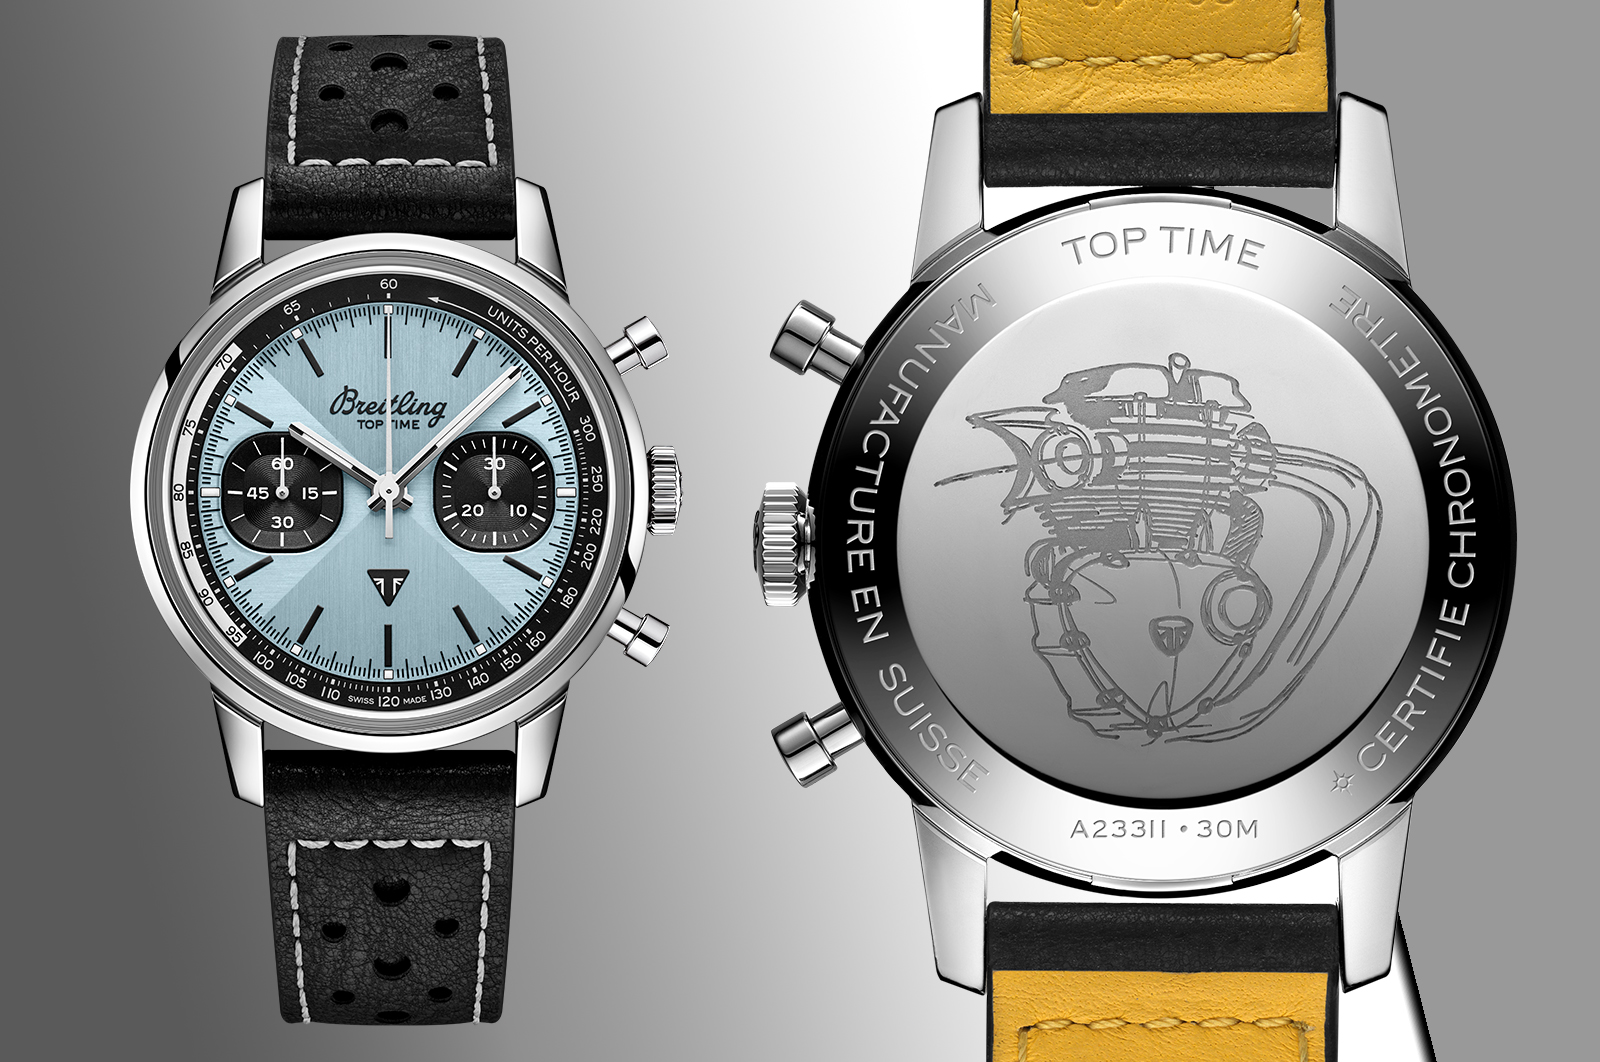 Introducing the all-new Breitling Top Time Triumph, born from a